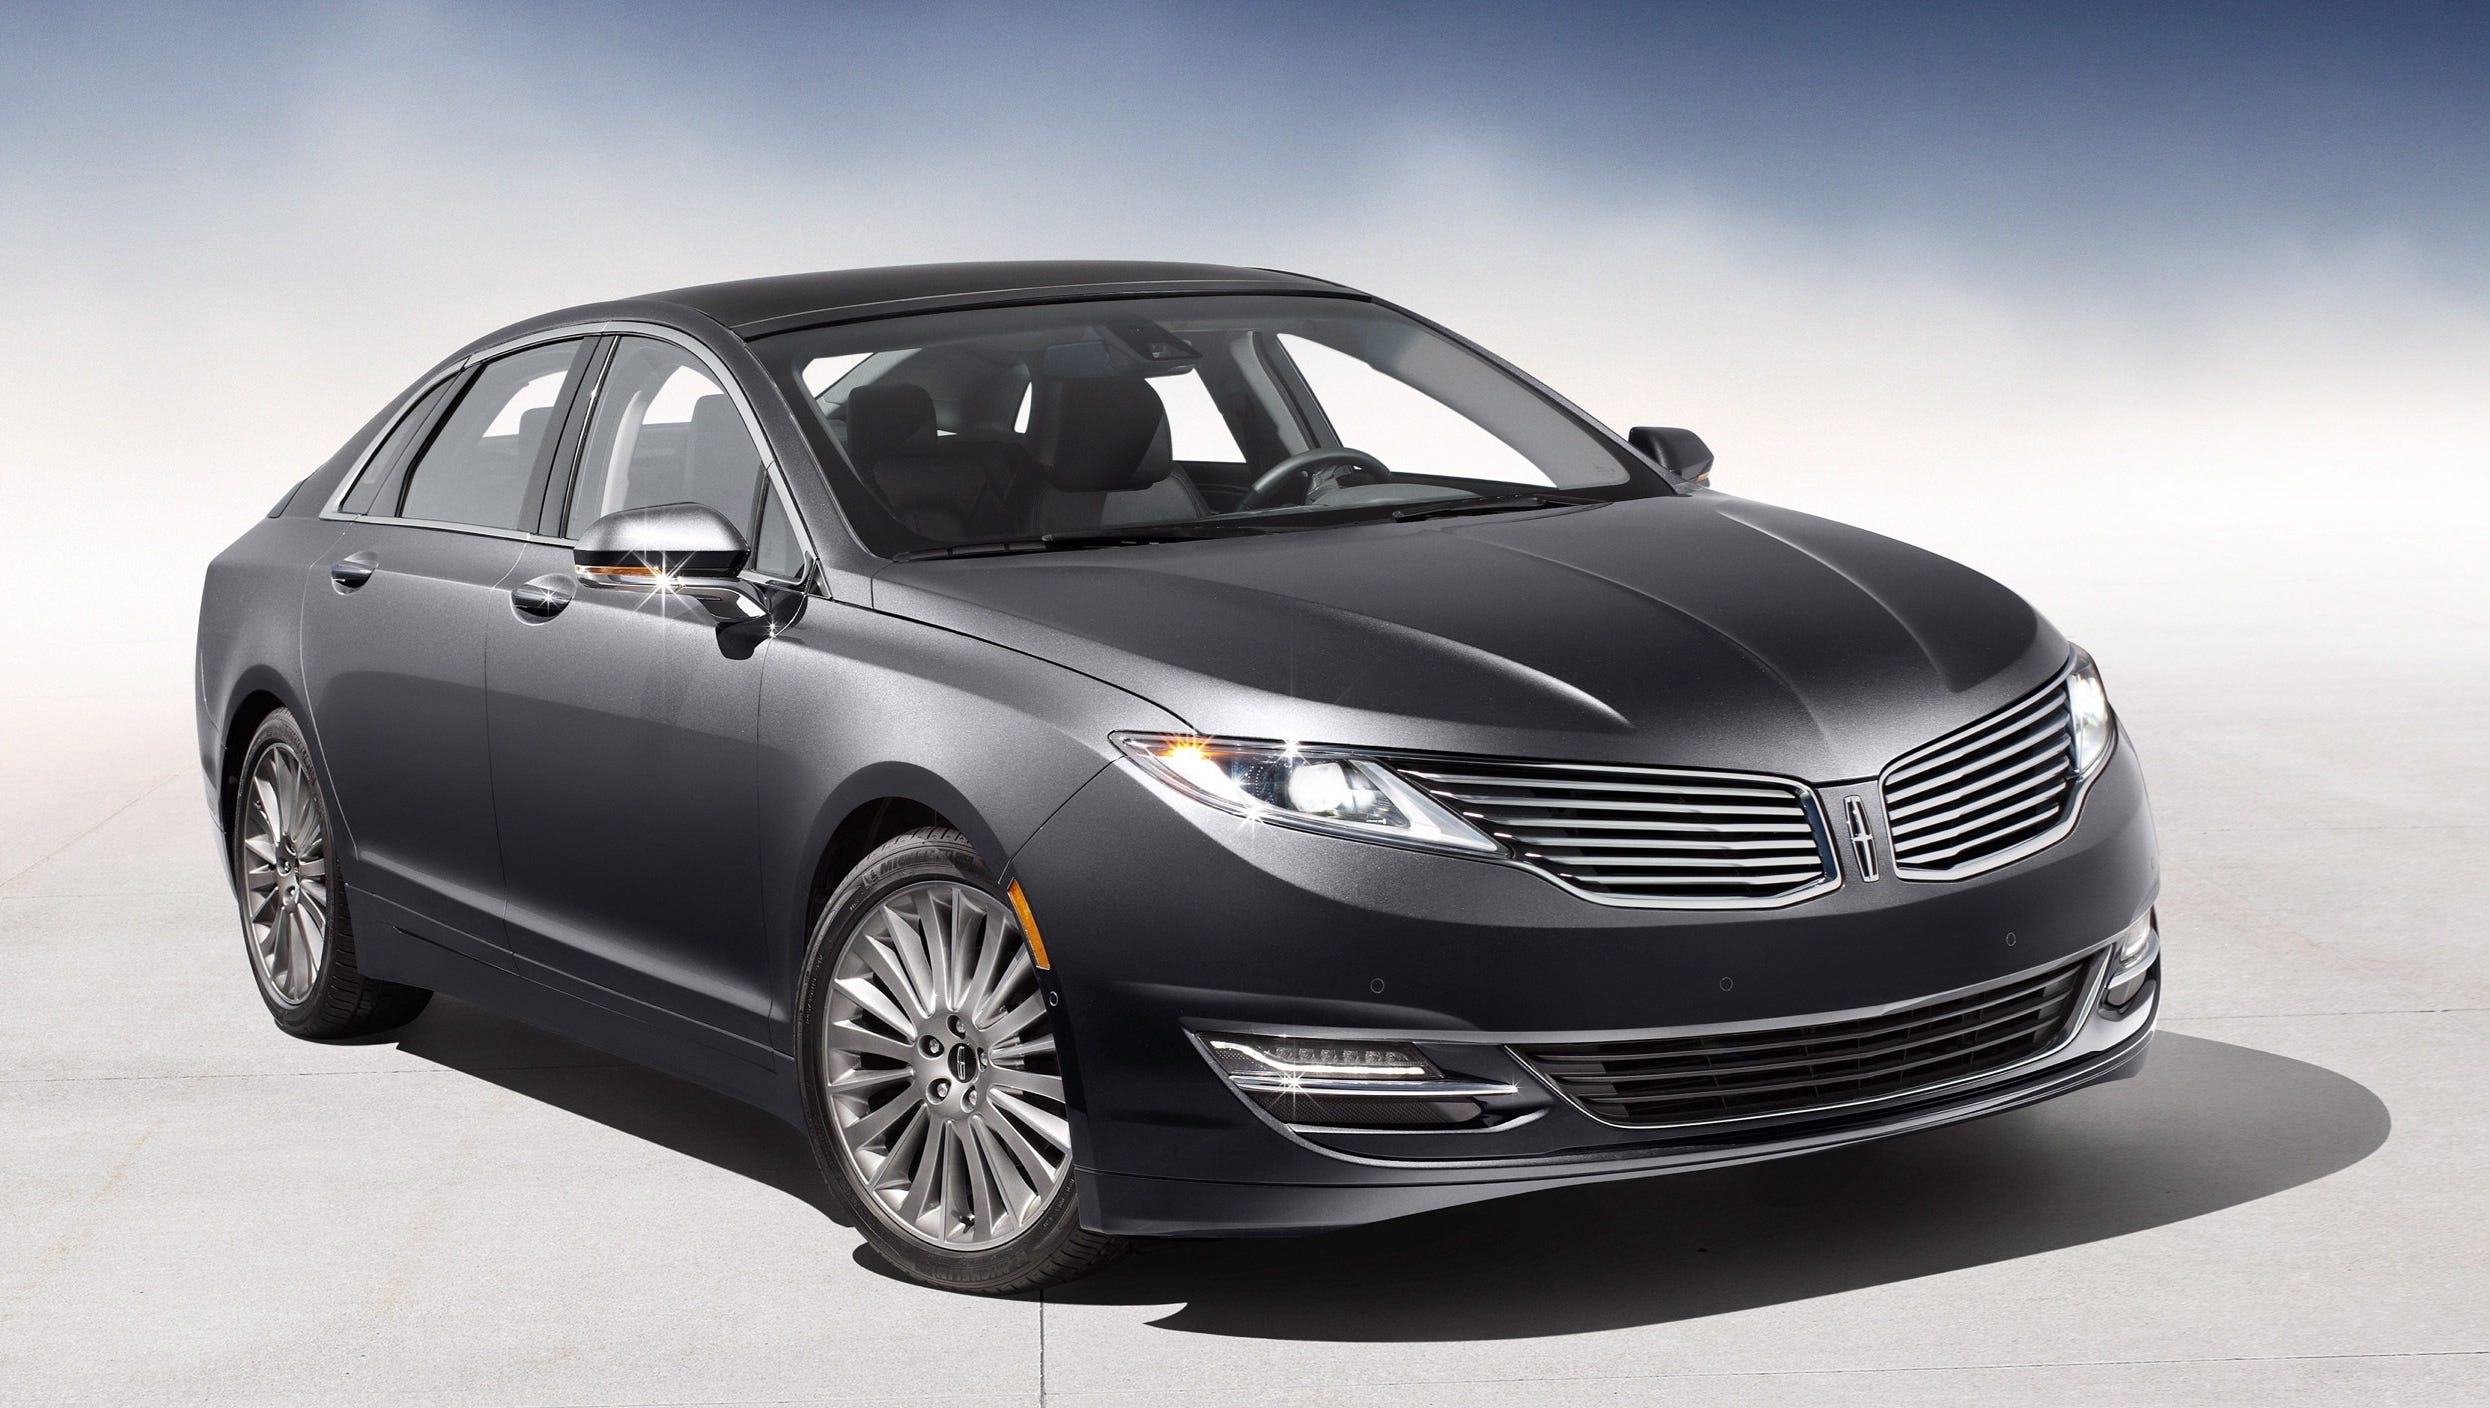 Test Drive: Lincoln logs in a nice restart with MKZ